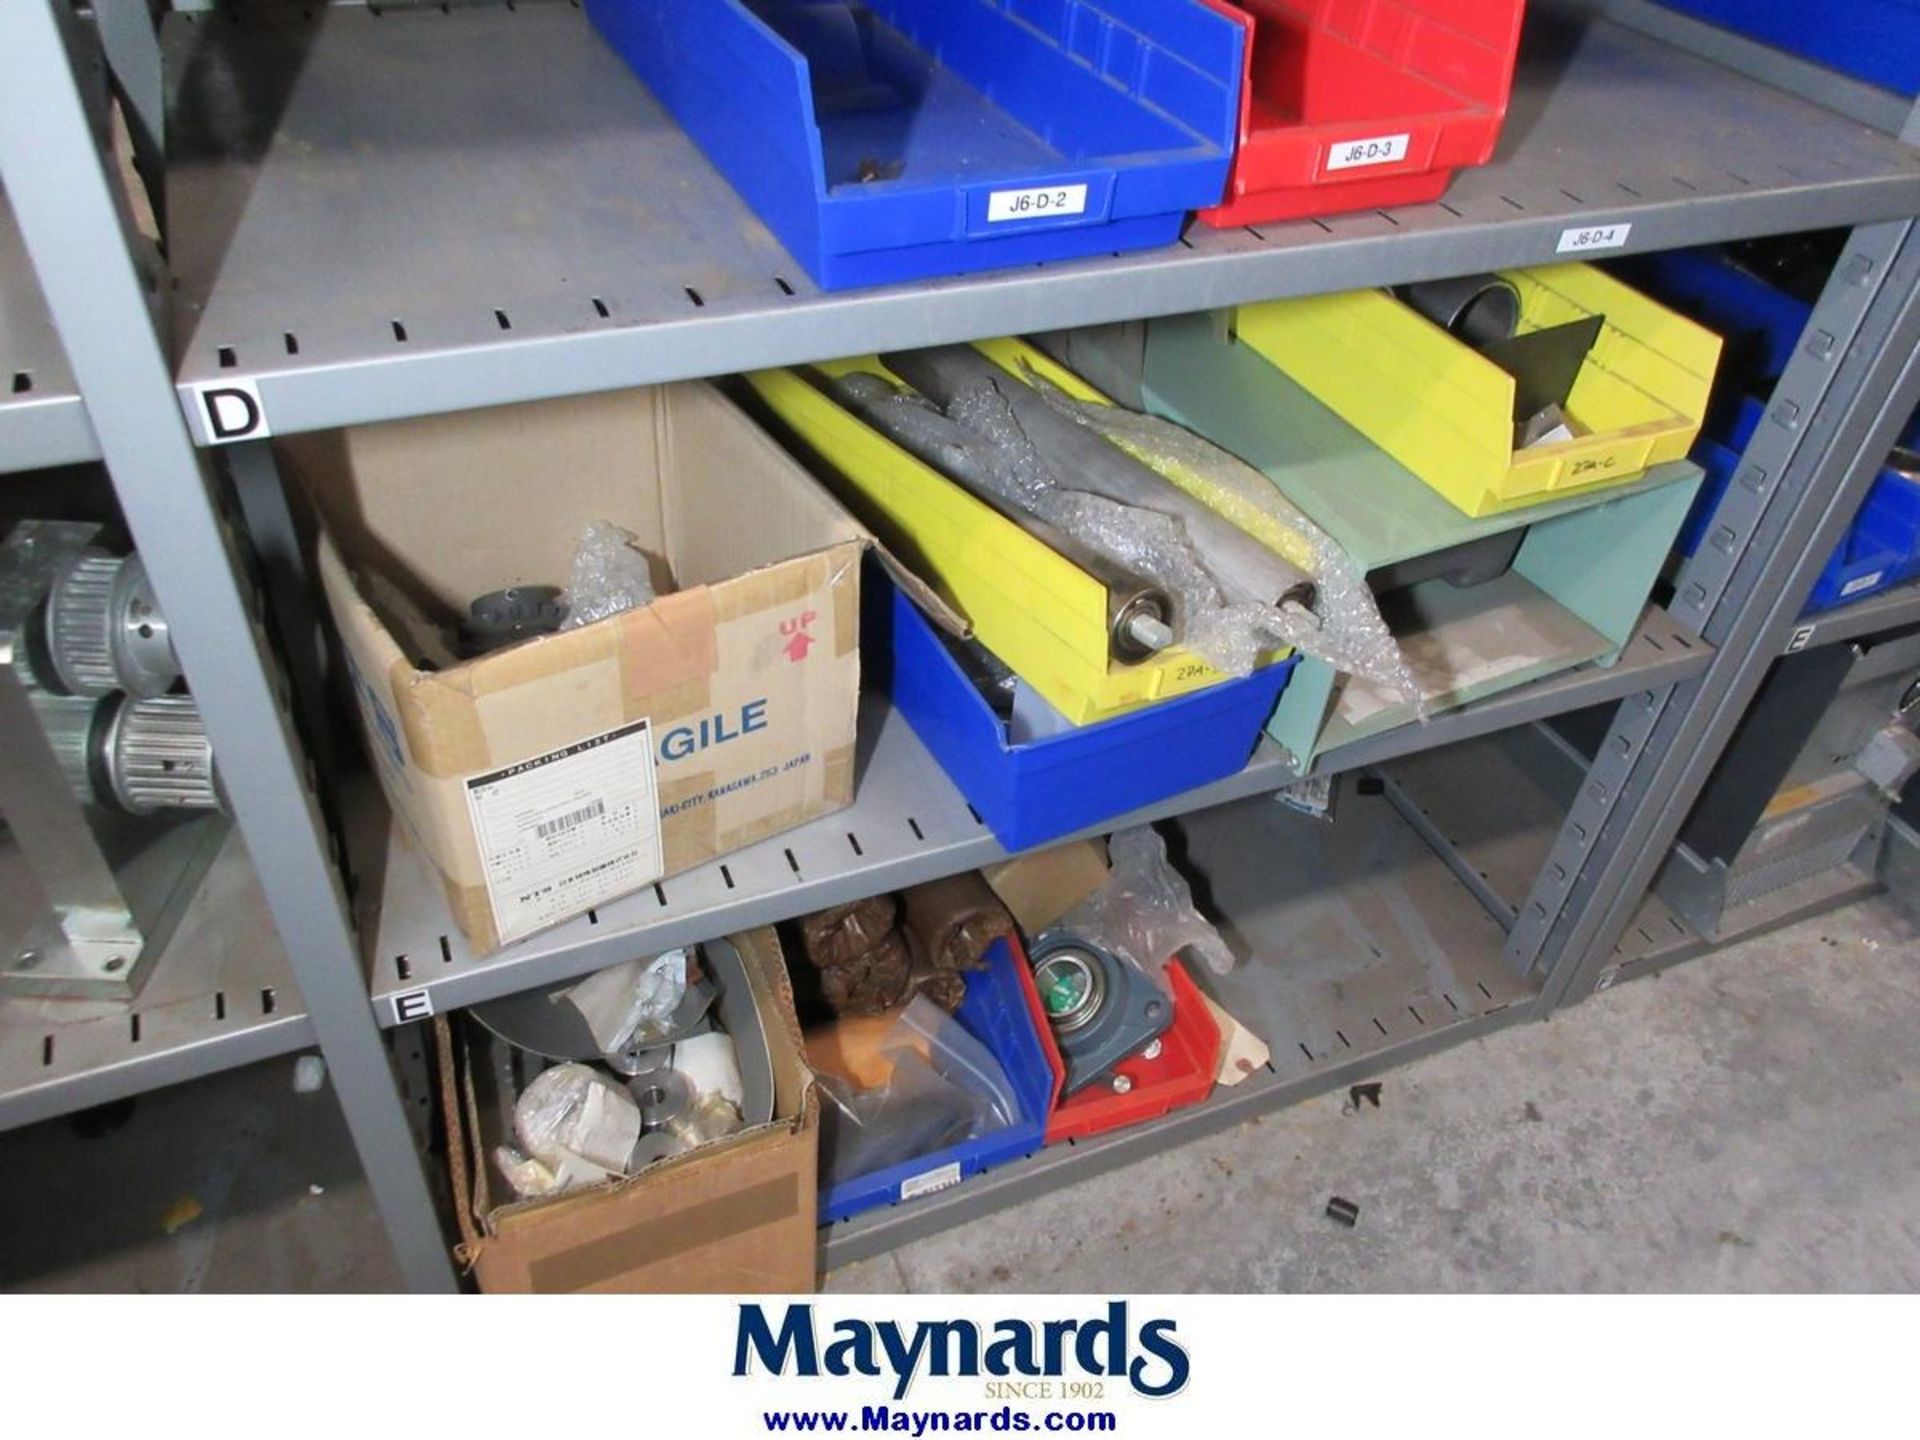 Large Lot of Electrical Controls, PLC's, Drives & Remaining Contents of Maint. Parts Crib - Image 27 of 107